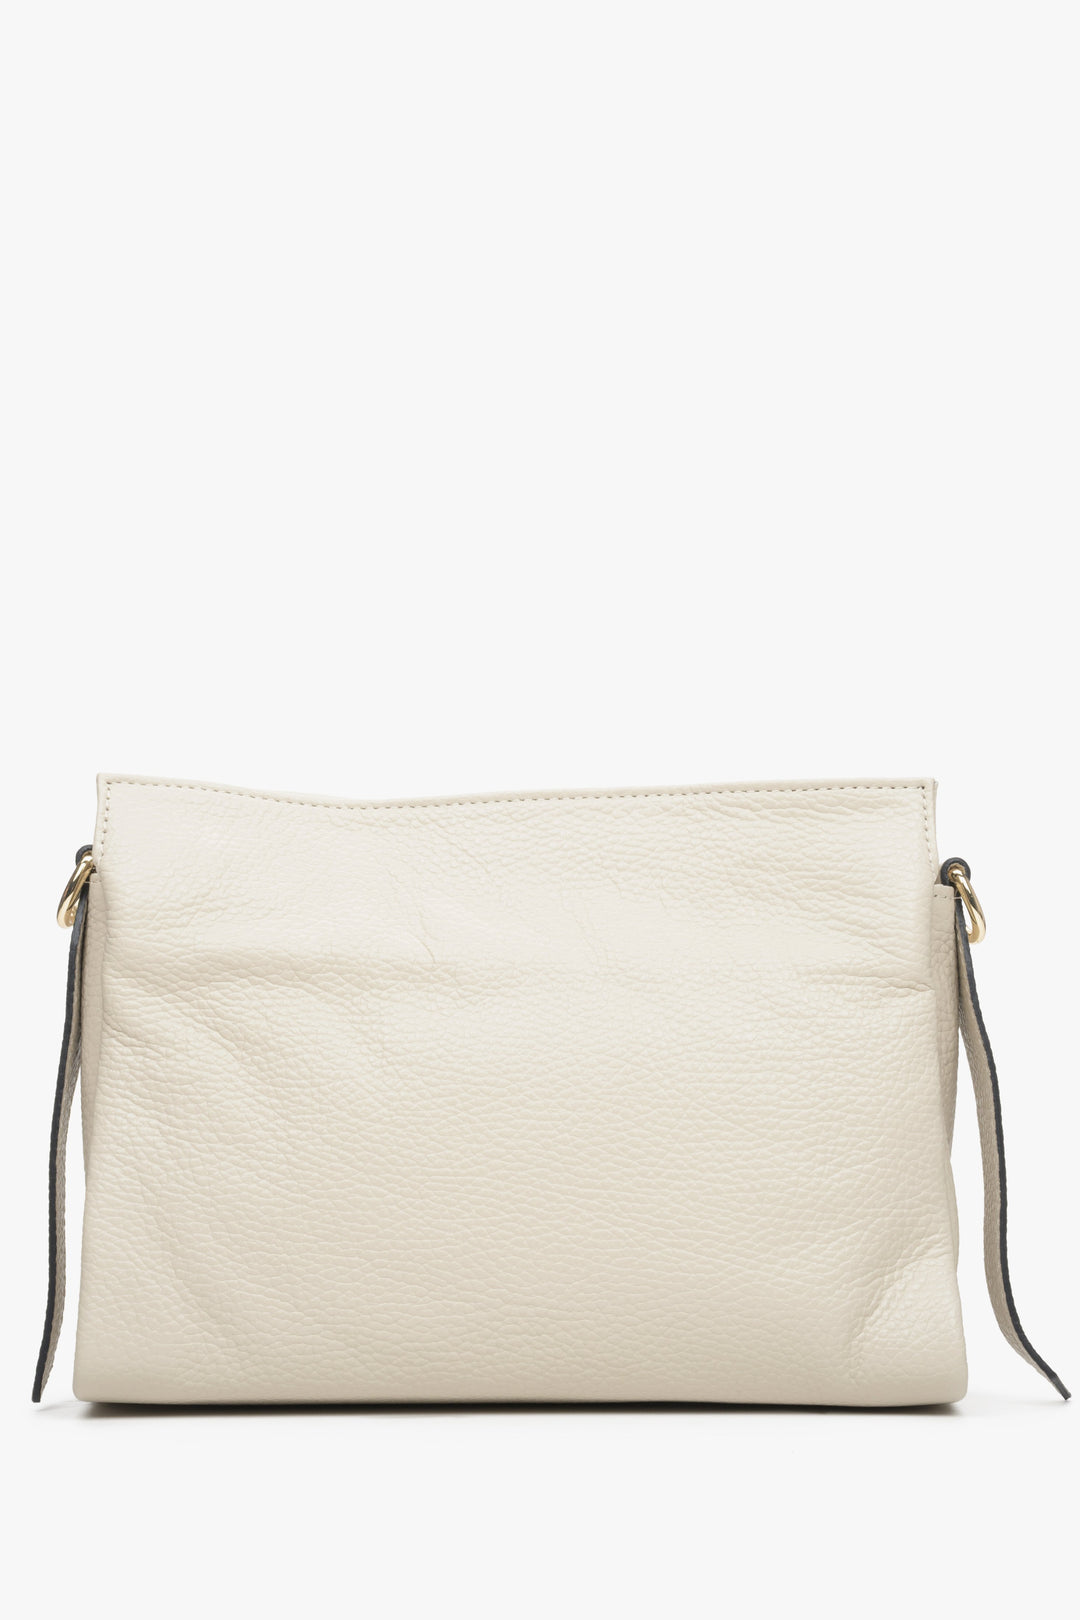 Beige leather women's crossbody bag by Estro with an additional strap.